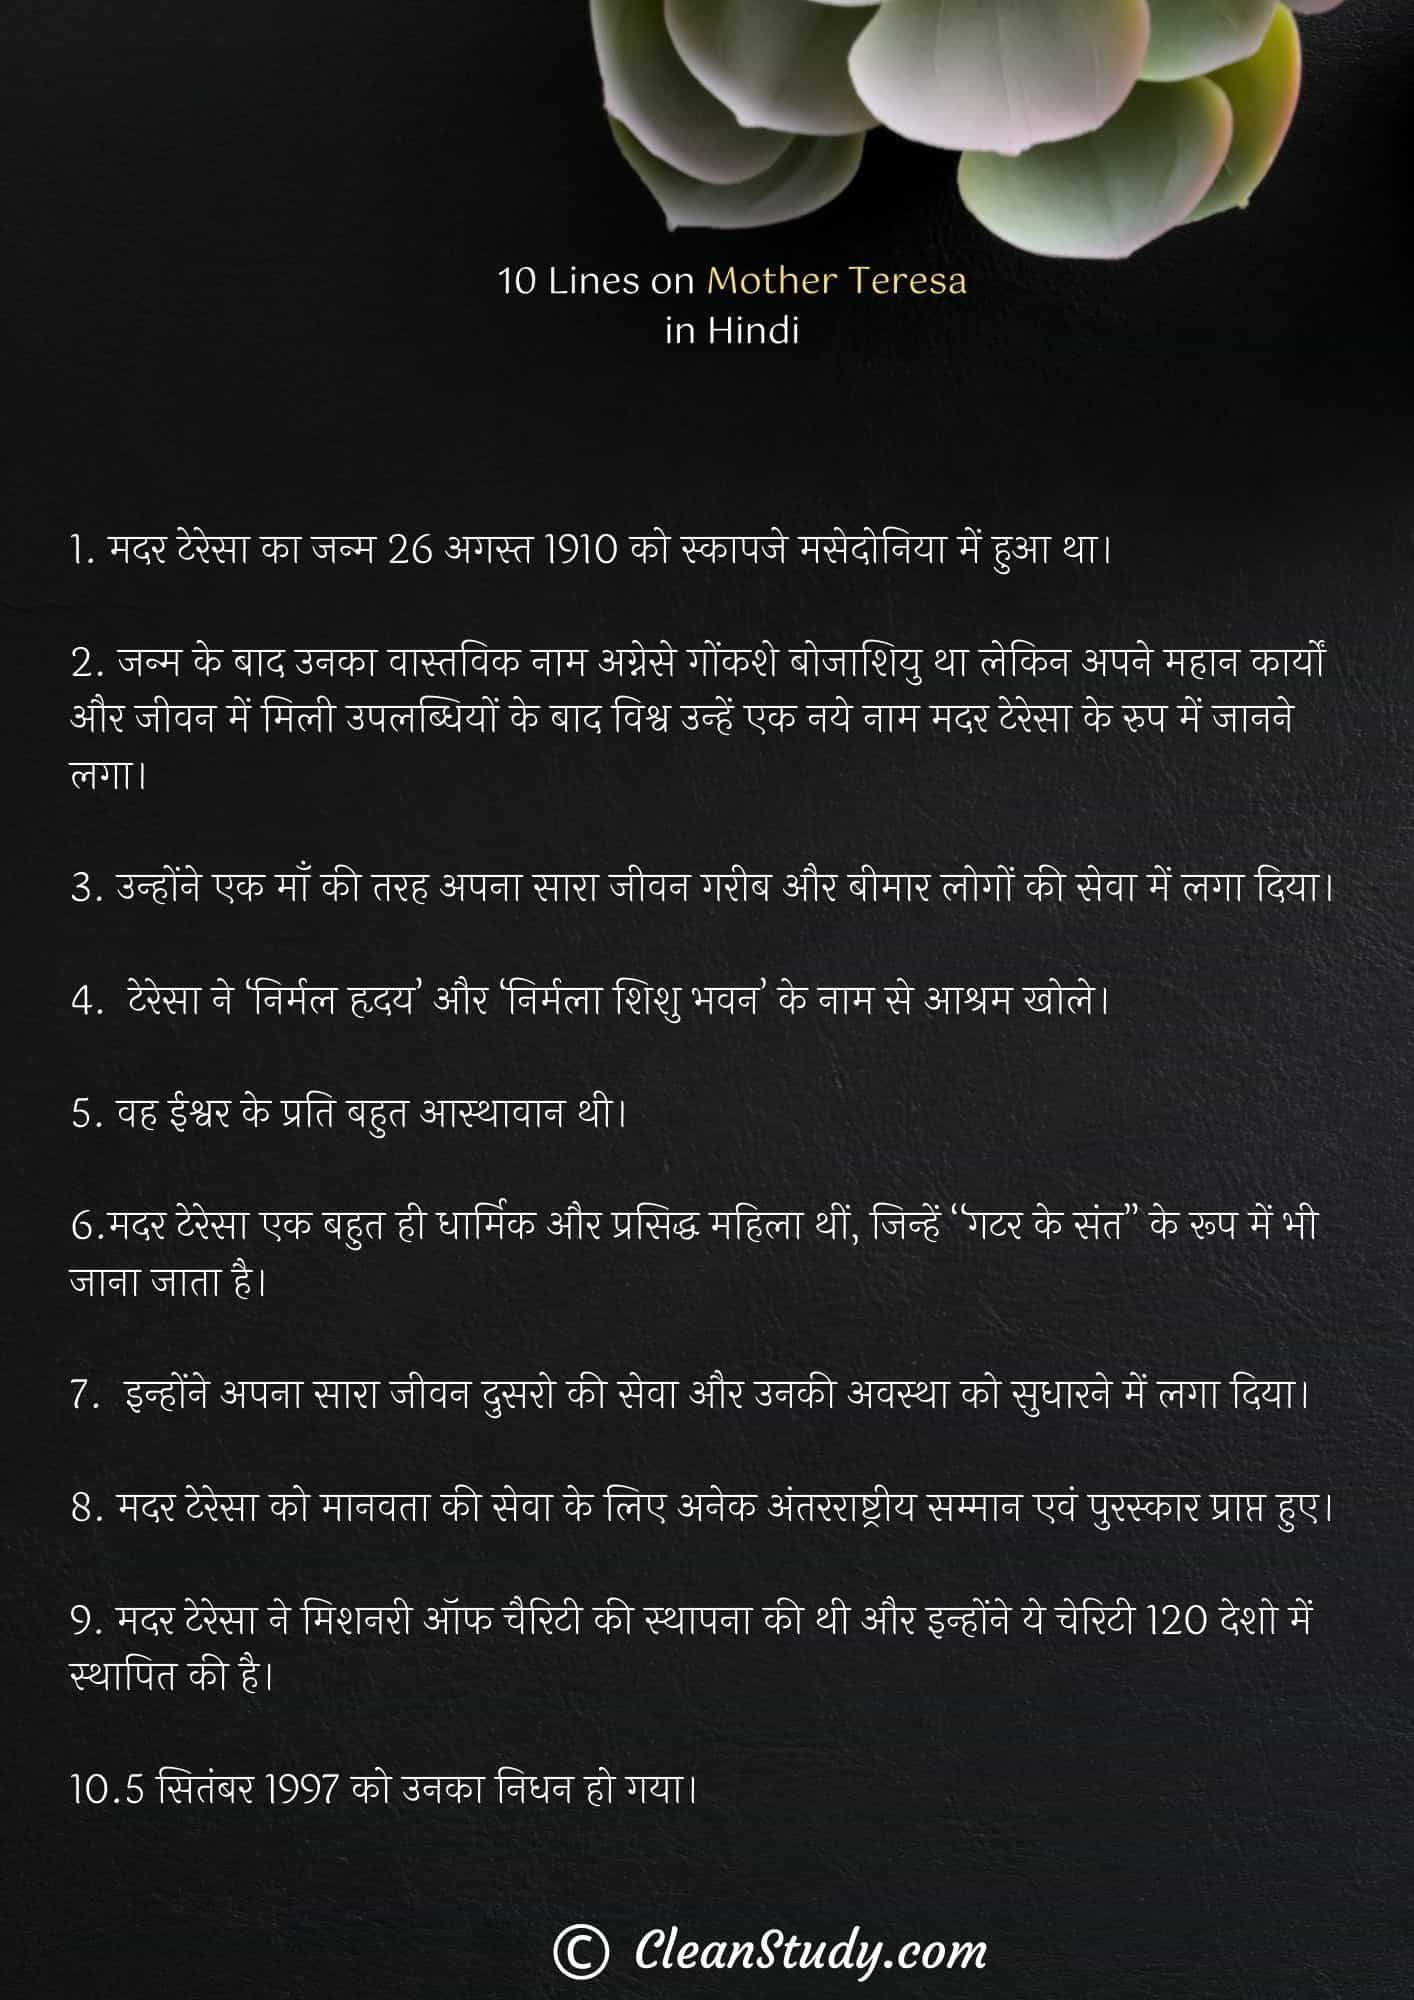 10 Lines on Mother Teresa in Hindi